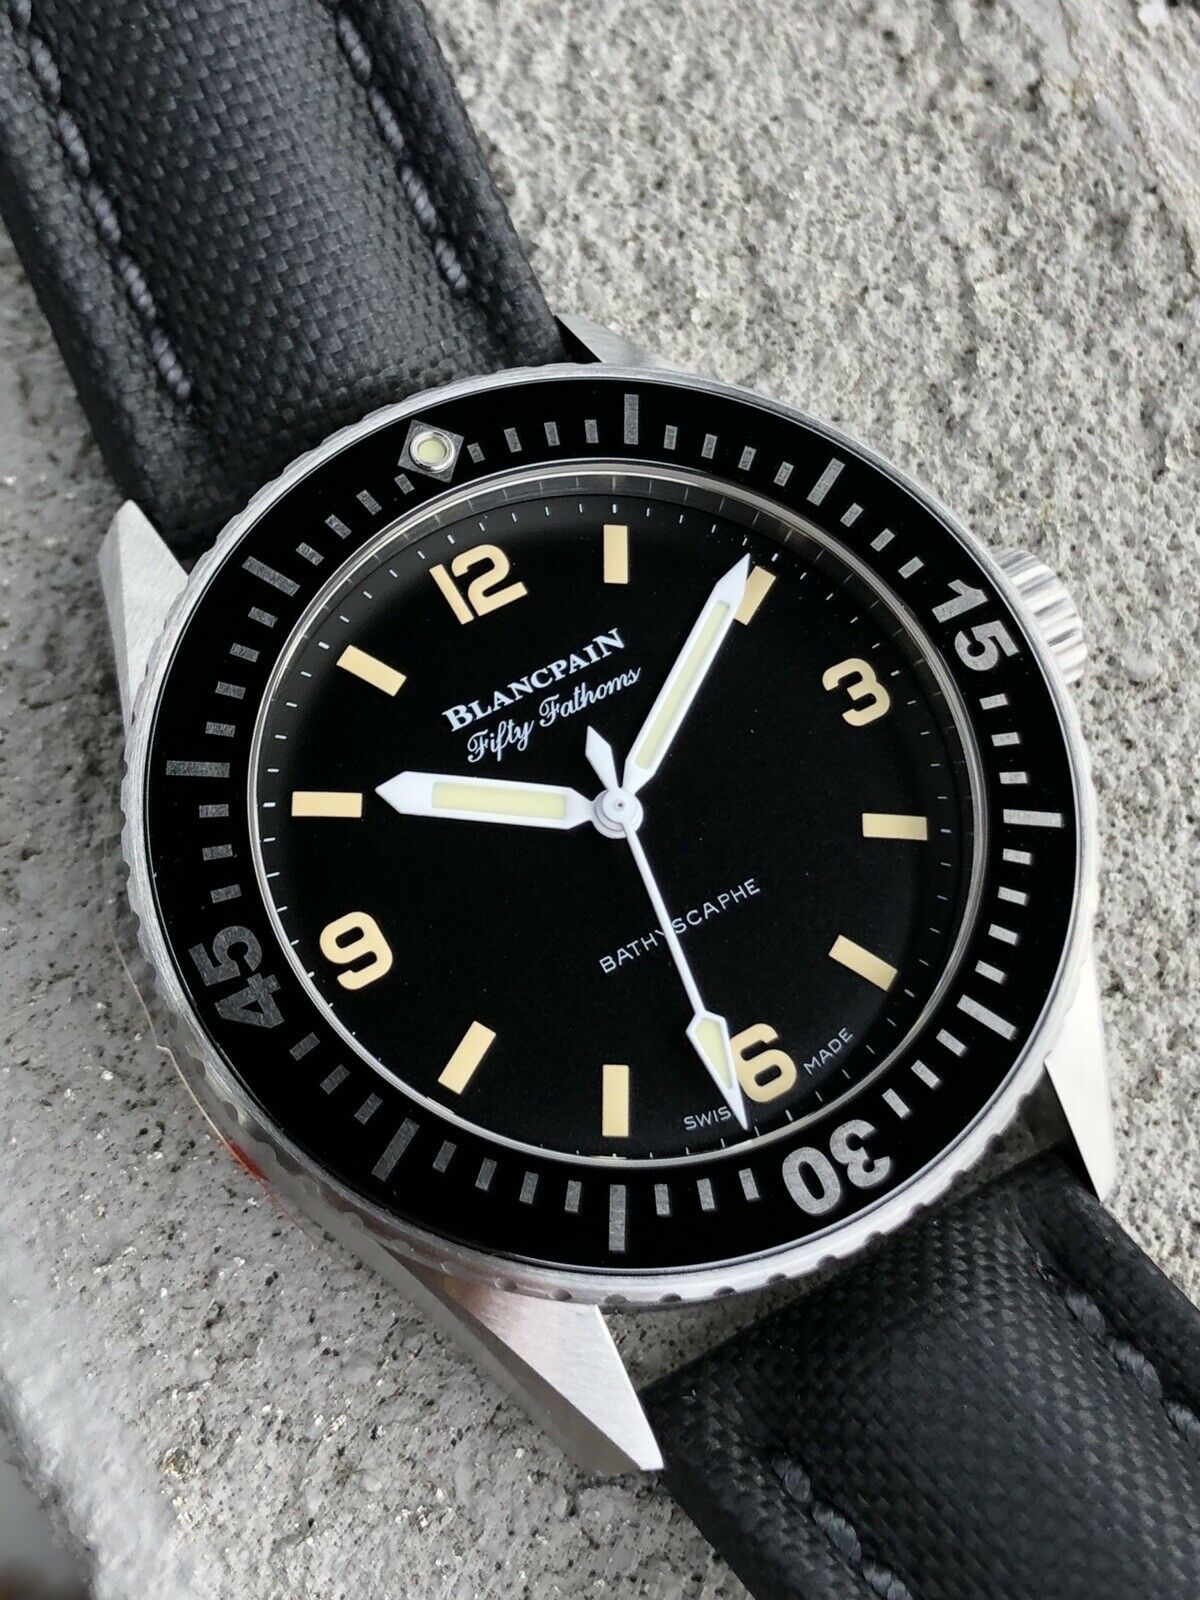 Blancpain_Fifty_Fathoms_Bathyscaphe_Limited_Edition_for_HODINKEE_-_Brand_New_282_29.jpg